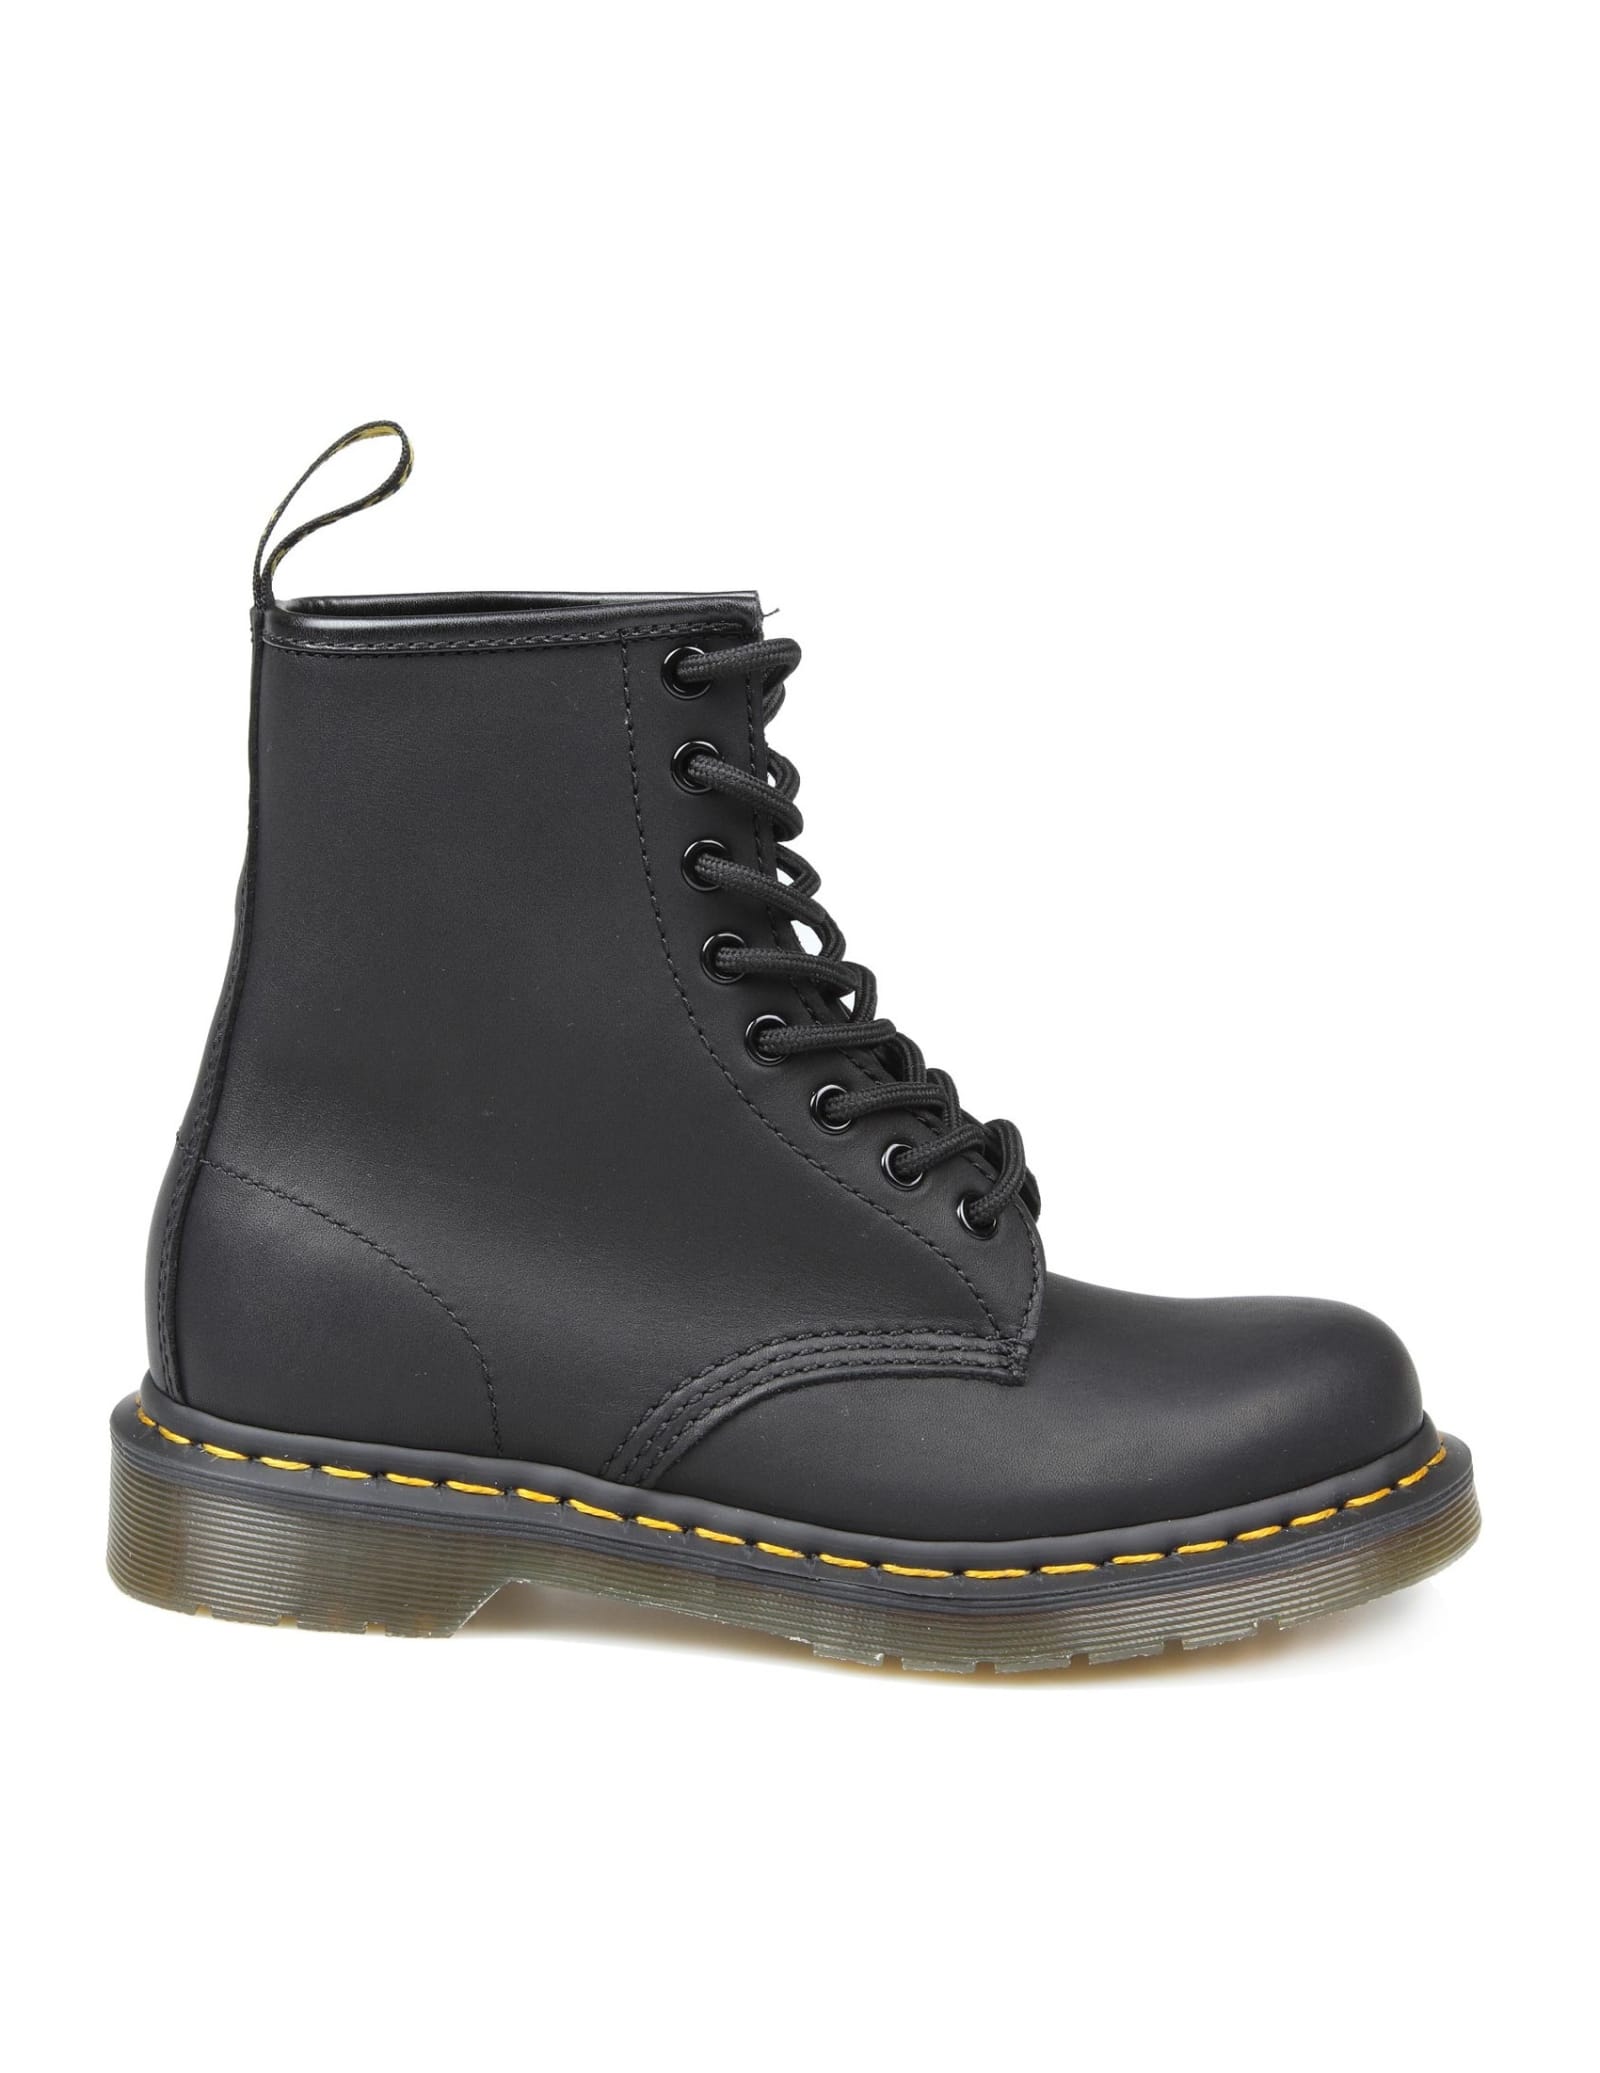 Buy Dr. Martens Dr. martens Grease Leather Anfibio Color Black online, shop Dr. Martens shoes with free shipping